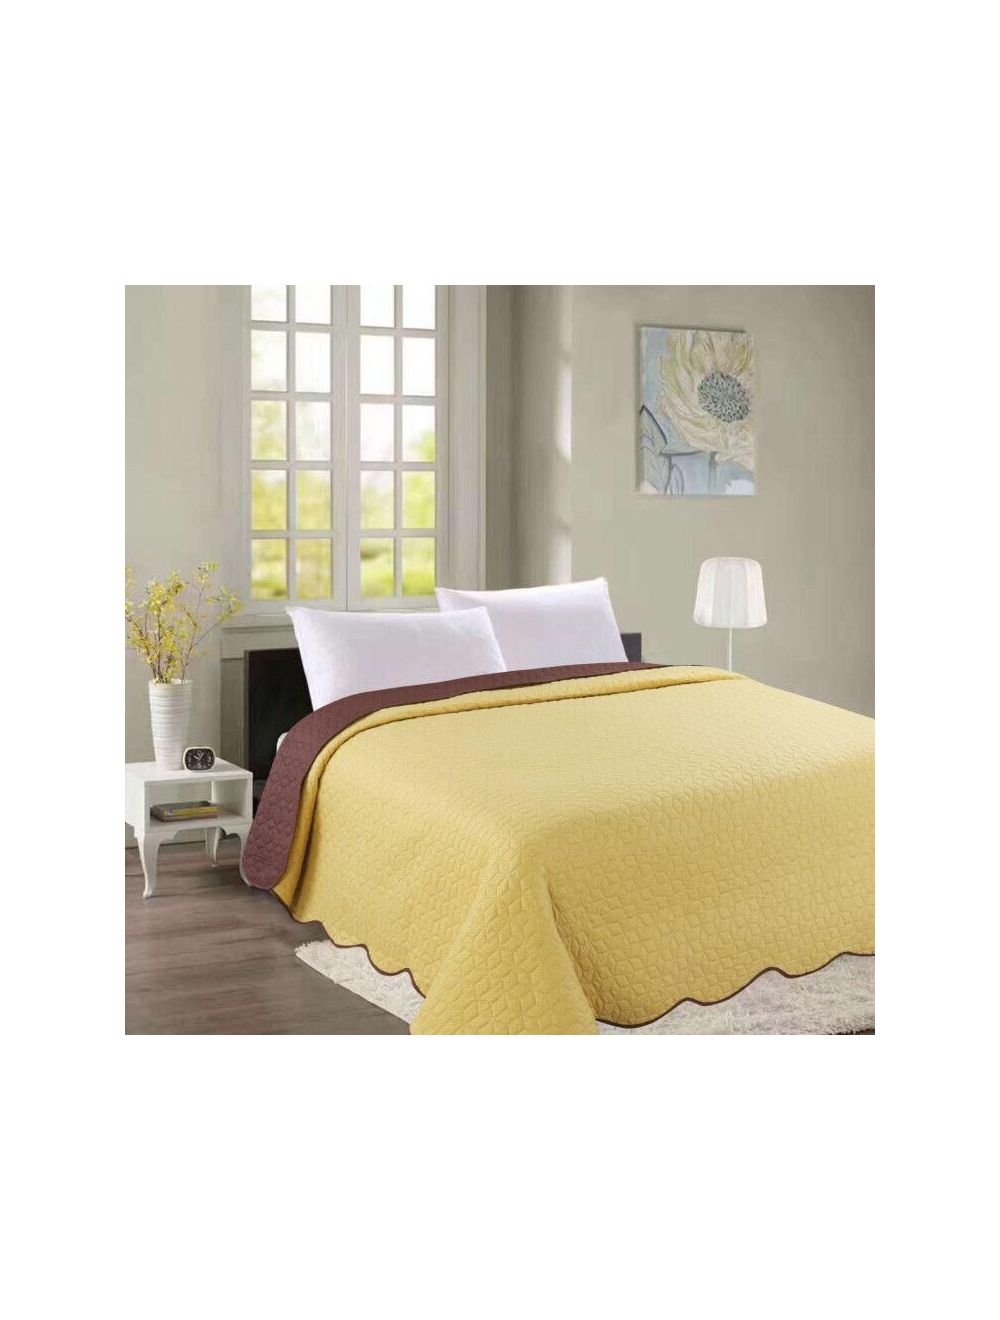 Rahalife 3 Piece Reversible Laser Quilted Bedspread/Quilt Set Polyester Yellow/Coffee King-RLBS/K3/26